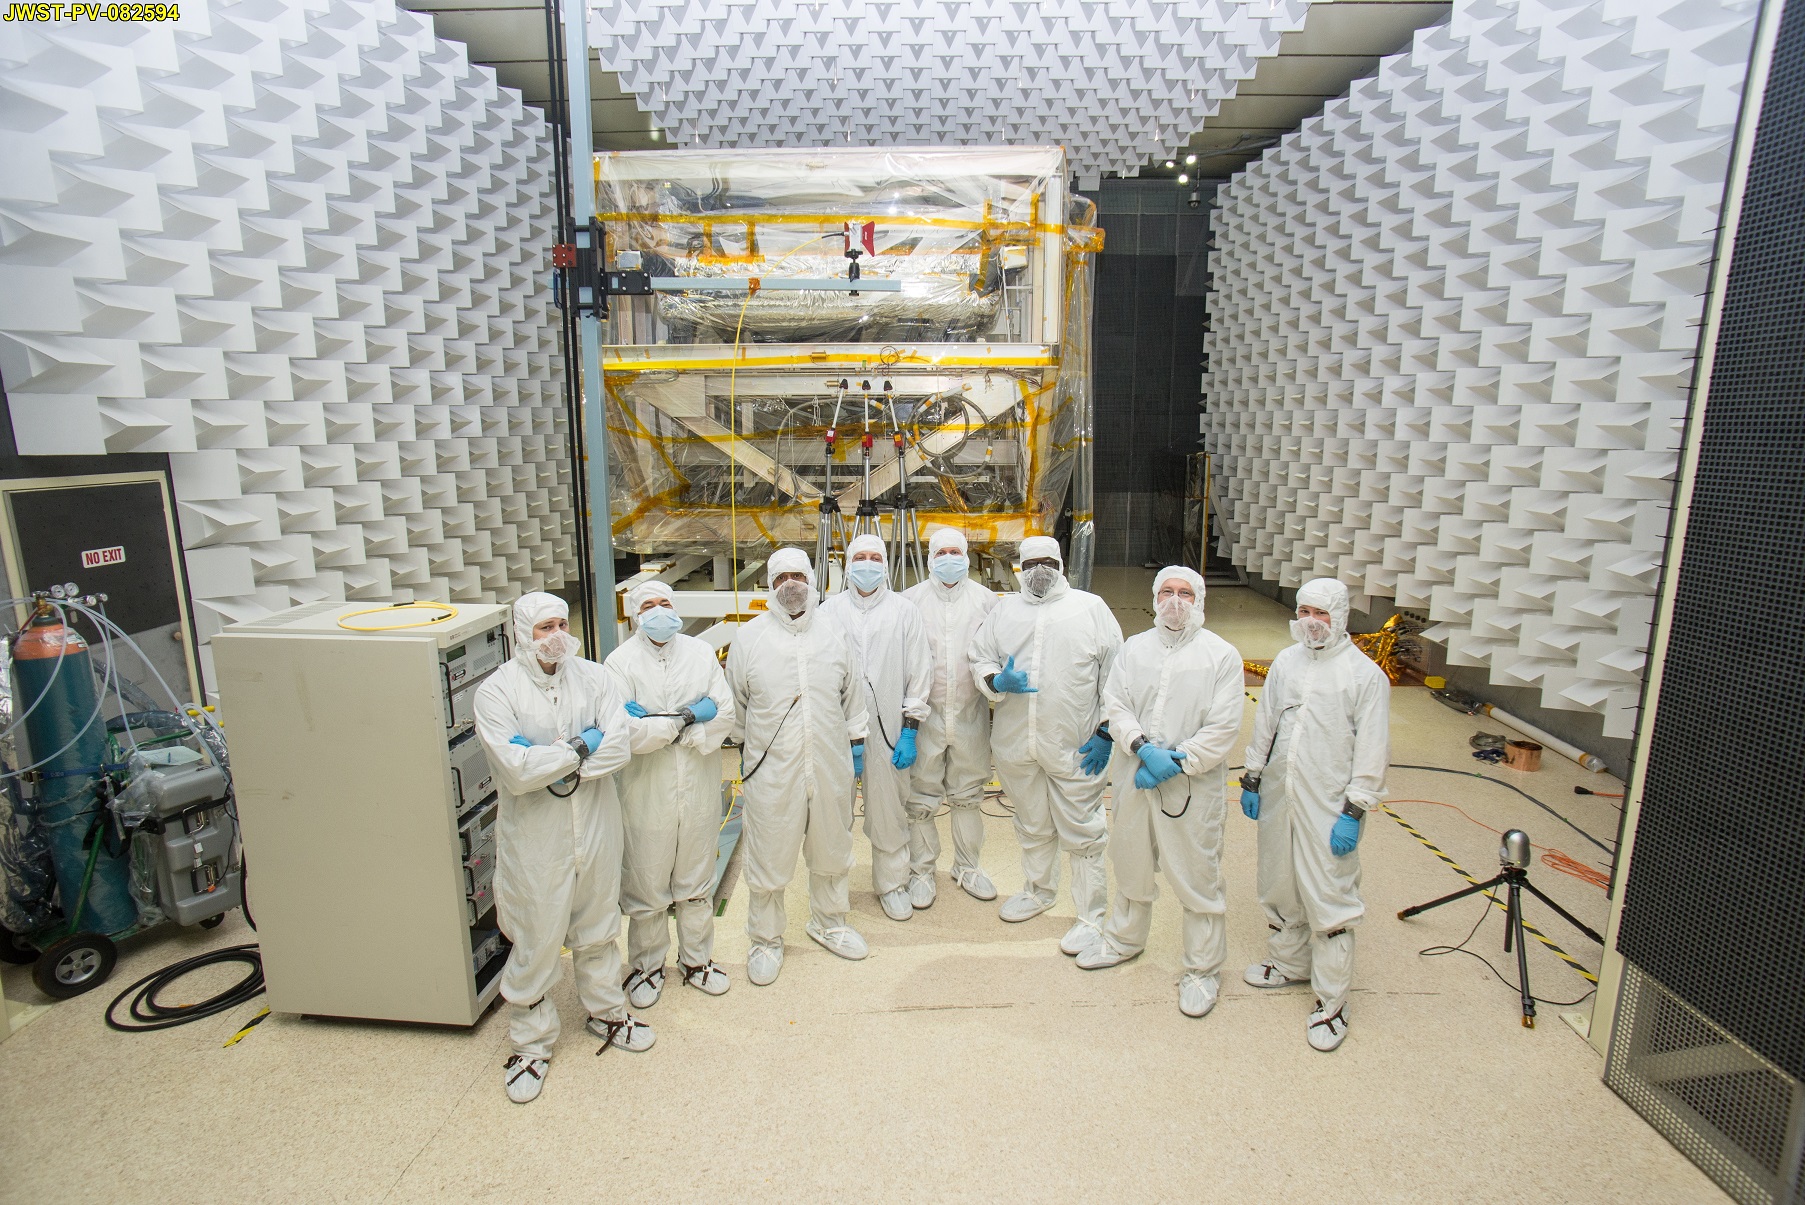 From NASA: "A team of engineers in special clean room suits at NASA Goddard. Seen from left to right: Andy Mentges, Nathan Block, Vaughn Nelson, Rob Houle, John McCloskey, Mark Branch, Rick Jones, Greg Jamroz." Photo Credit: NASA/Chris Gunn